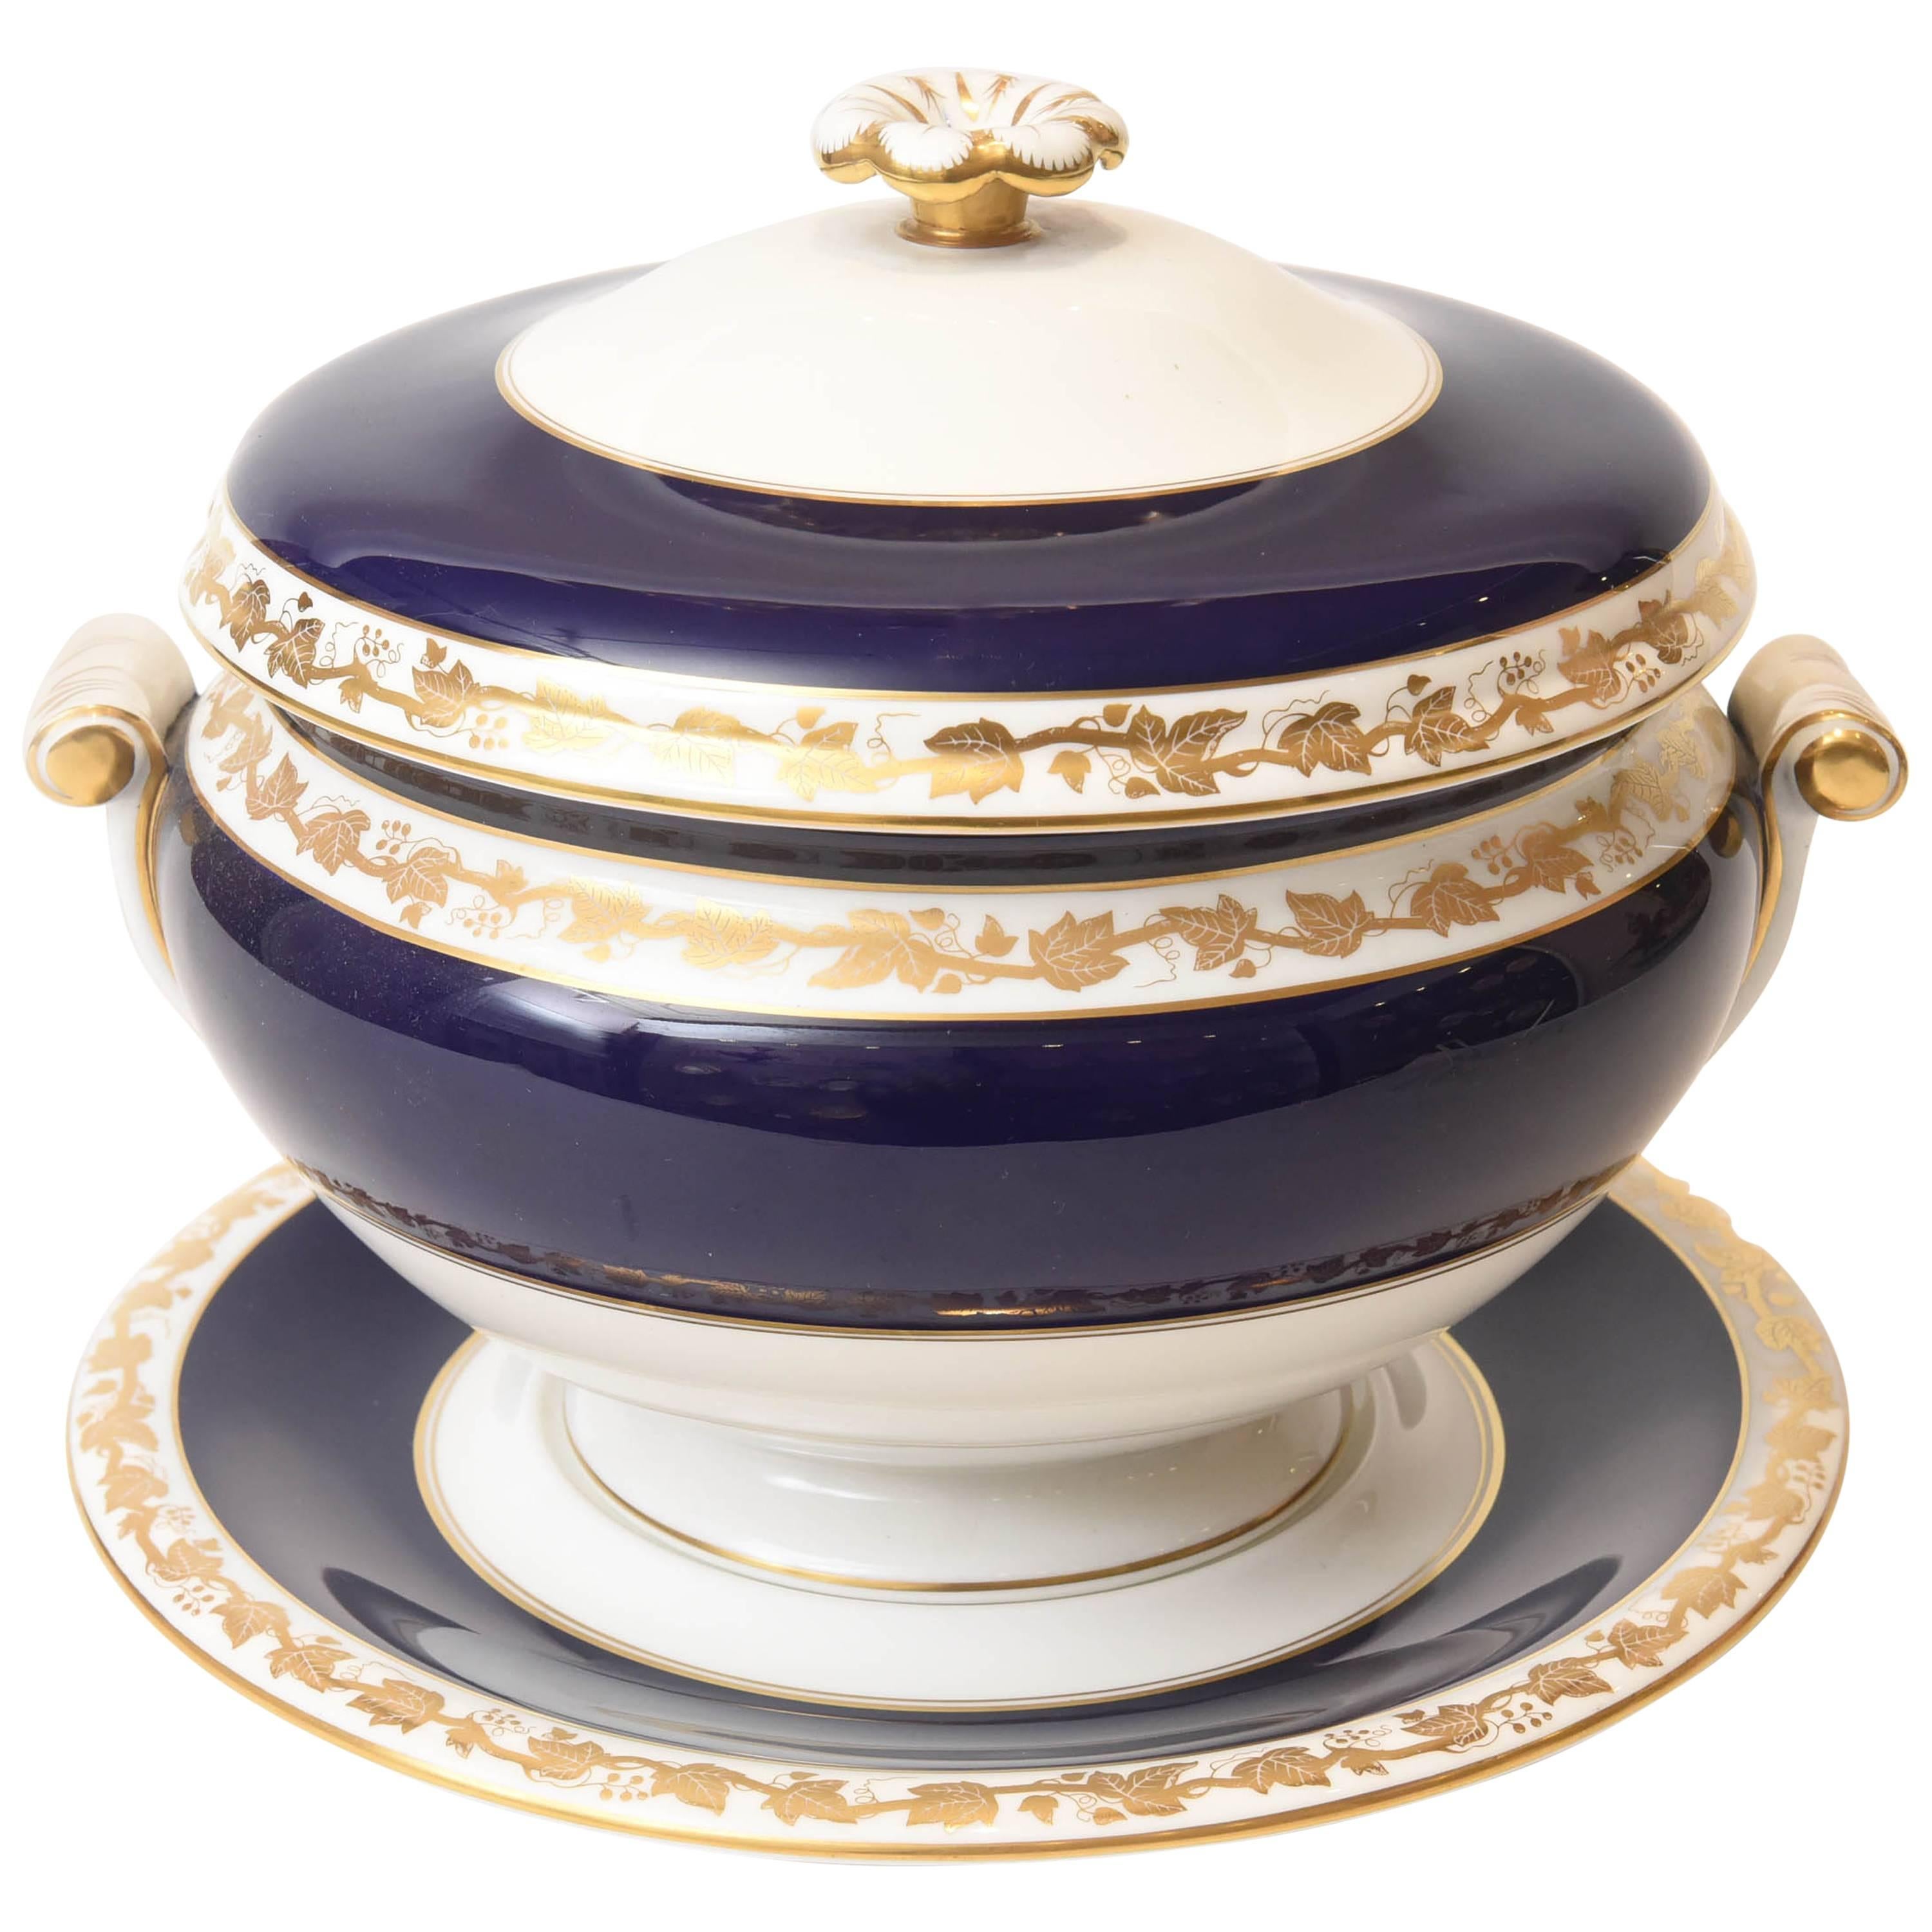 Wedgwood Cobalt Blue Soup Tureen and Stand, "Whitehall" Three-Piece Set